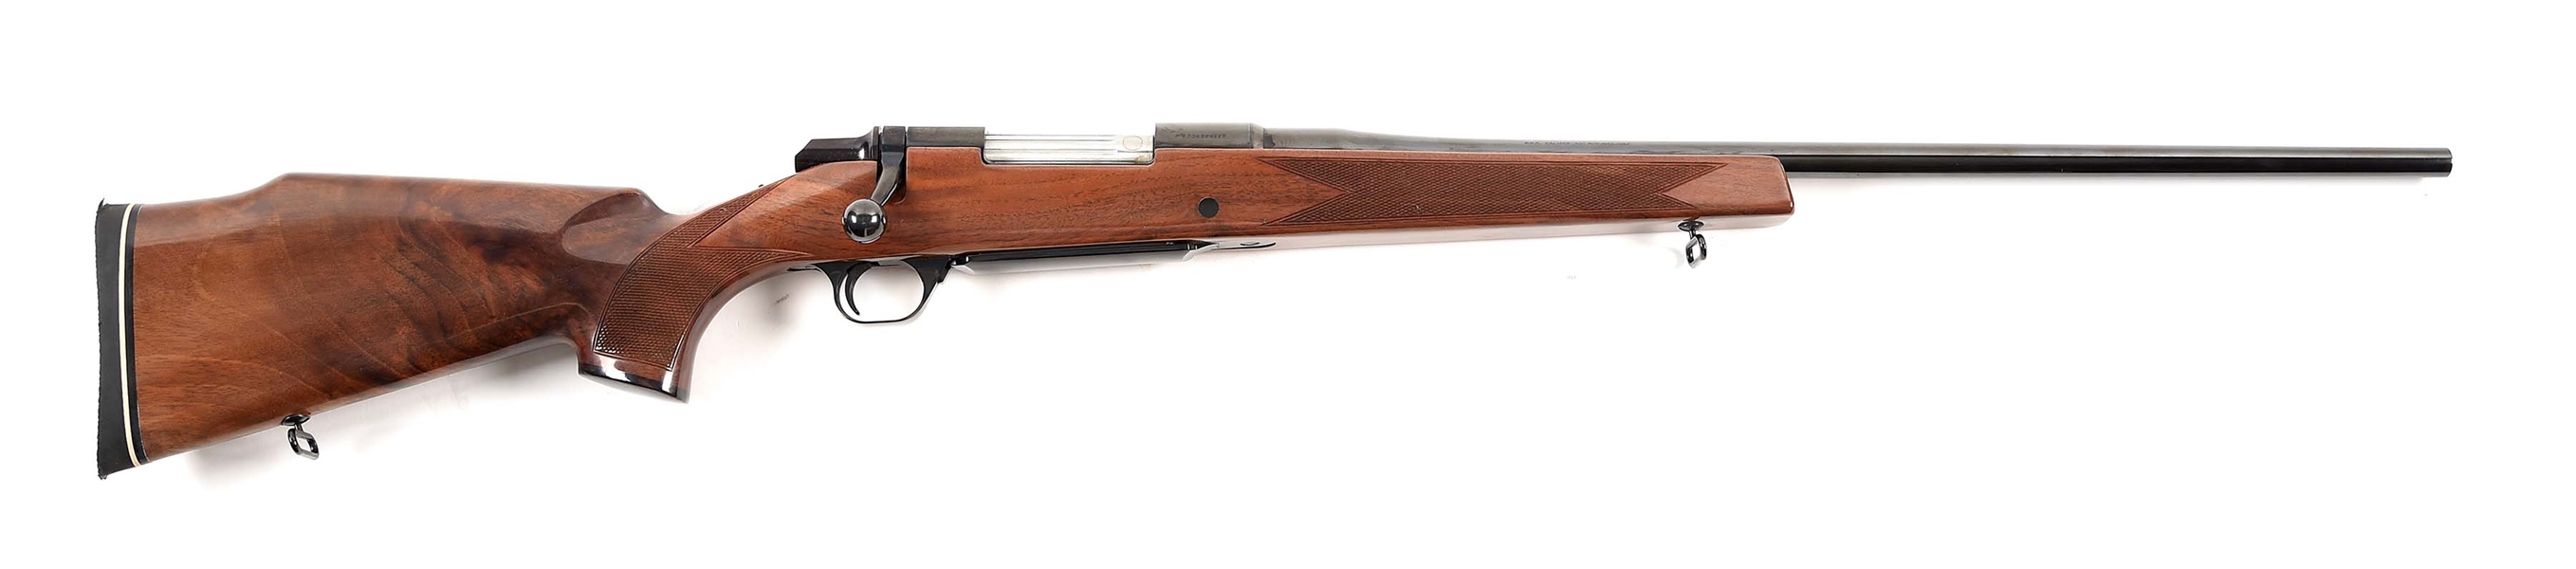 (M) BROWNING BBR .300 WINCHESTER MAGNUM BOLT ACTION RIFLE.